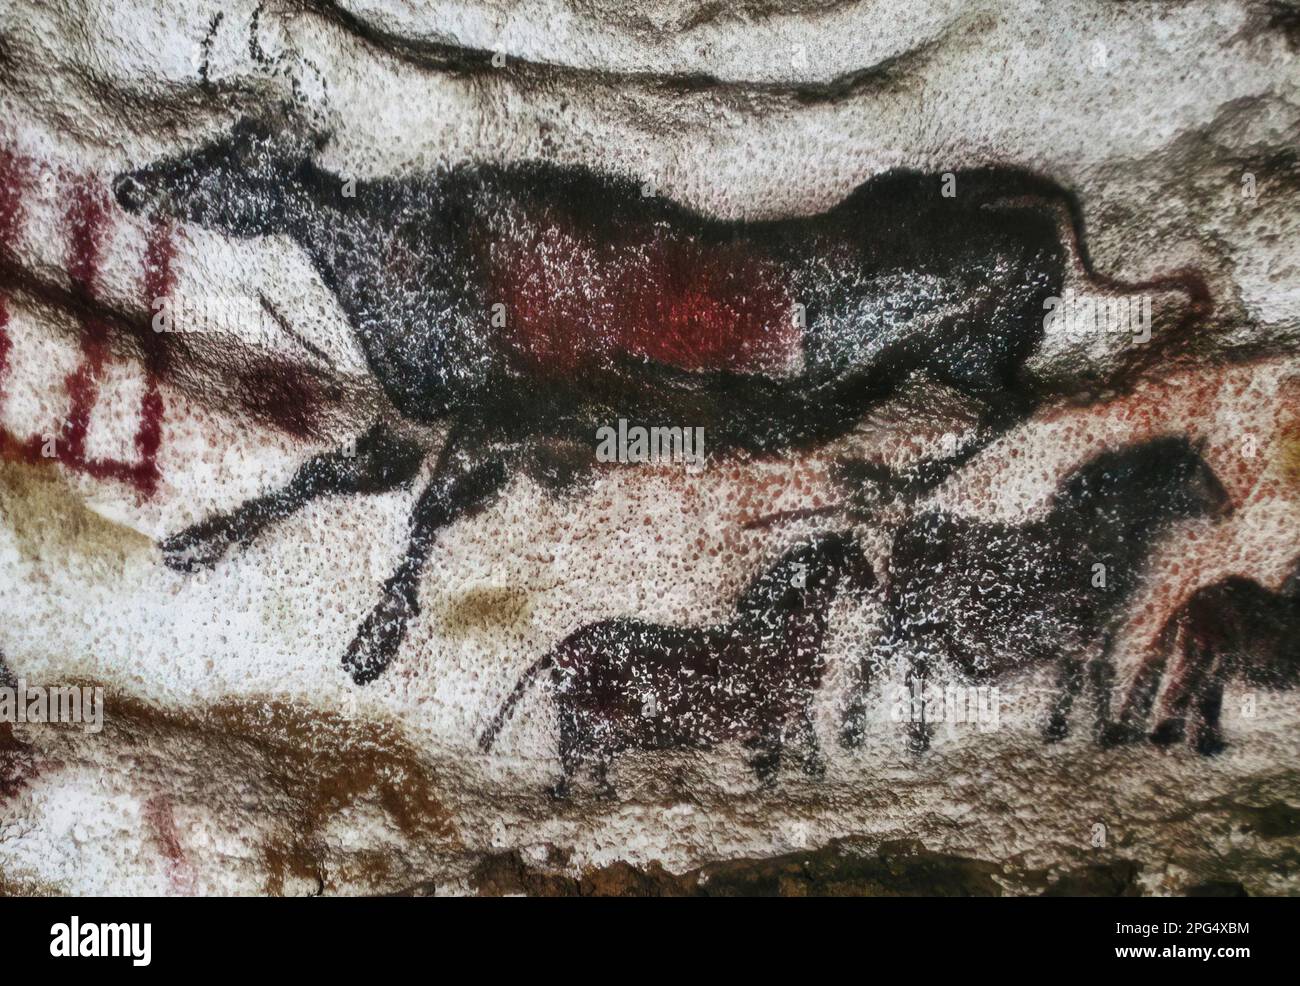 The caves of Lascaux are caves decorated with Paleolithic paintings, considered one of the most important testimonies of prehistoric art (UNESCO) Stock Photo